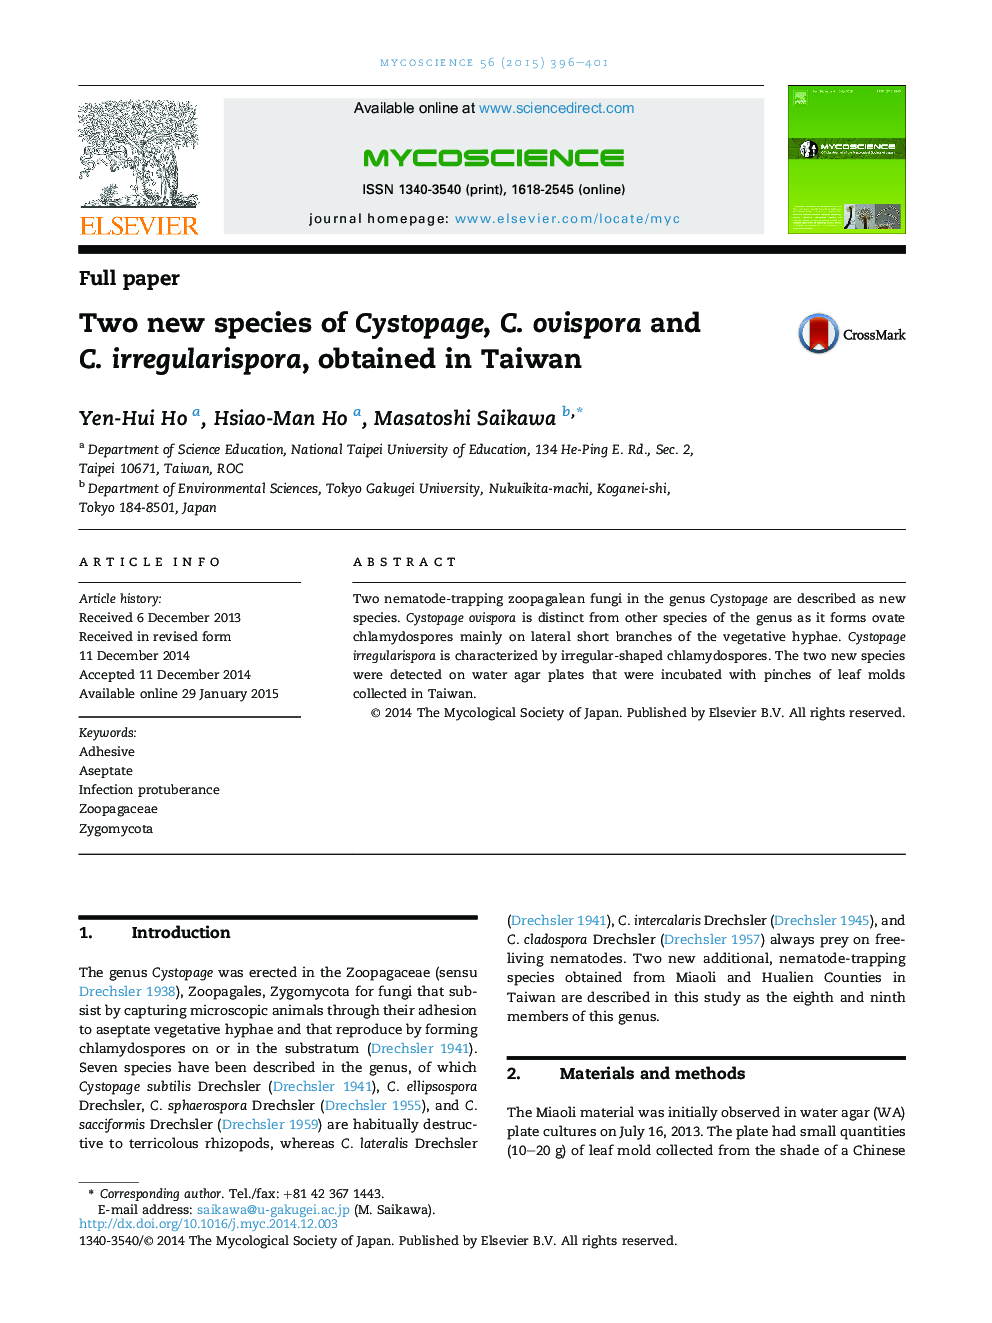 Two new species of Cystopage, C. ovispora and C. irregularispora, obtained in Taiwan